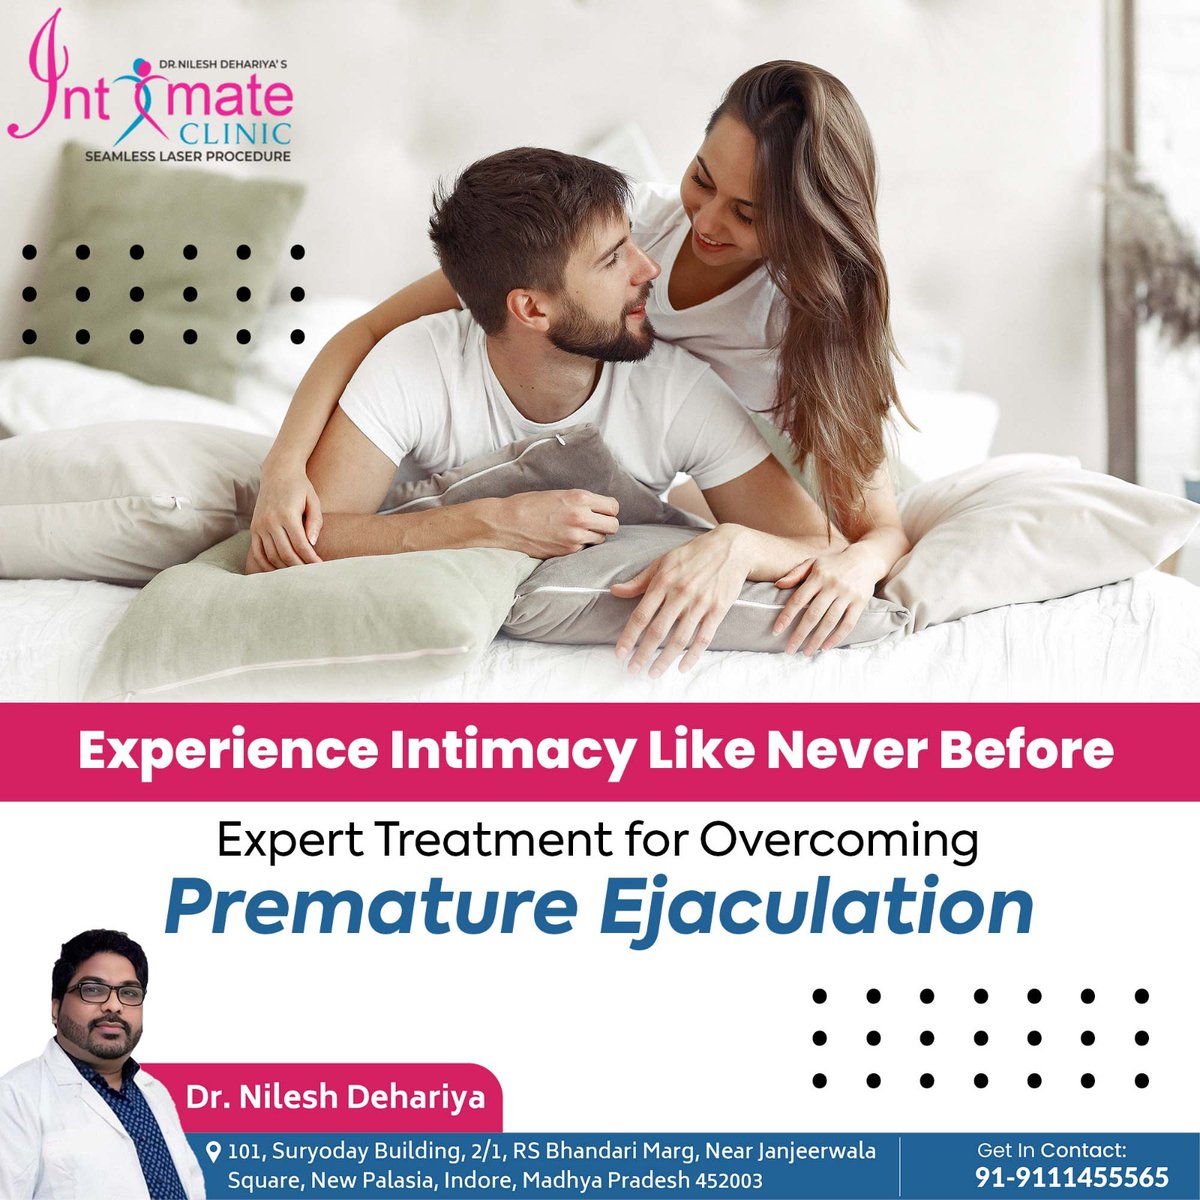 Experience Intimacy Like Never Before Expert Treatment for Overcoming Premature Ejaculation
.
intimateclinic.in
.
#PrematureEjaculation #PEAwareness #SexualHealth #Intimacy #PETreatment #PEManagement #LastingLonger #PESupport #PerformanceAnxiety #SexualWellness